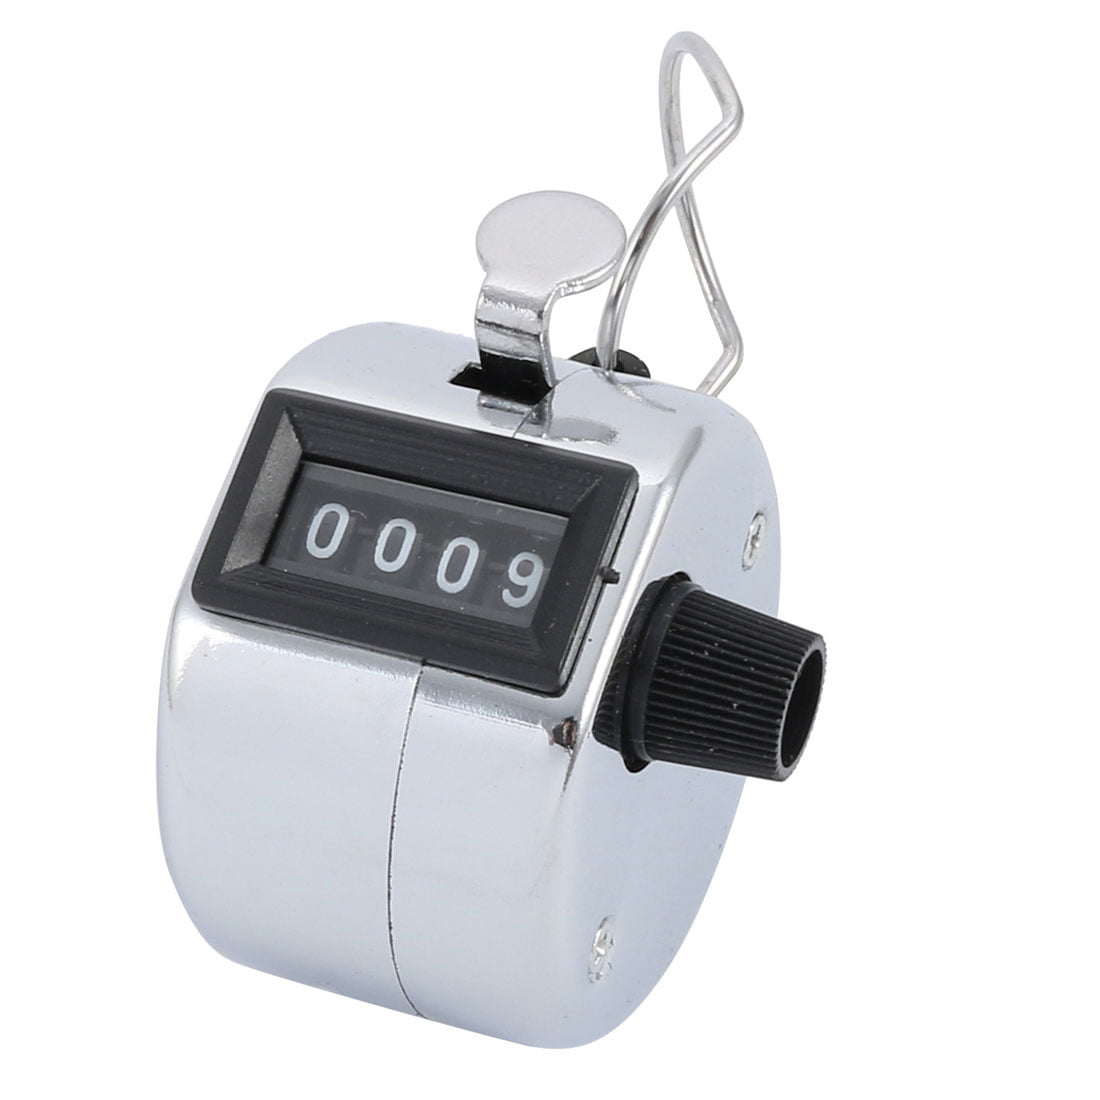 Free First Class Postage!!! Swim Lap Tally Counter 